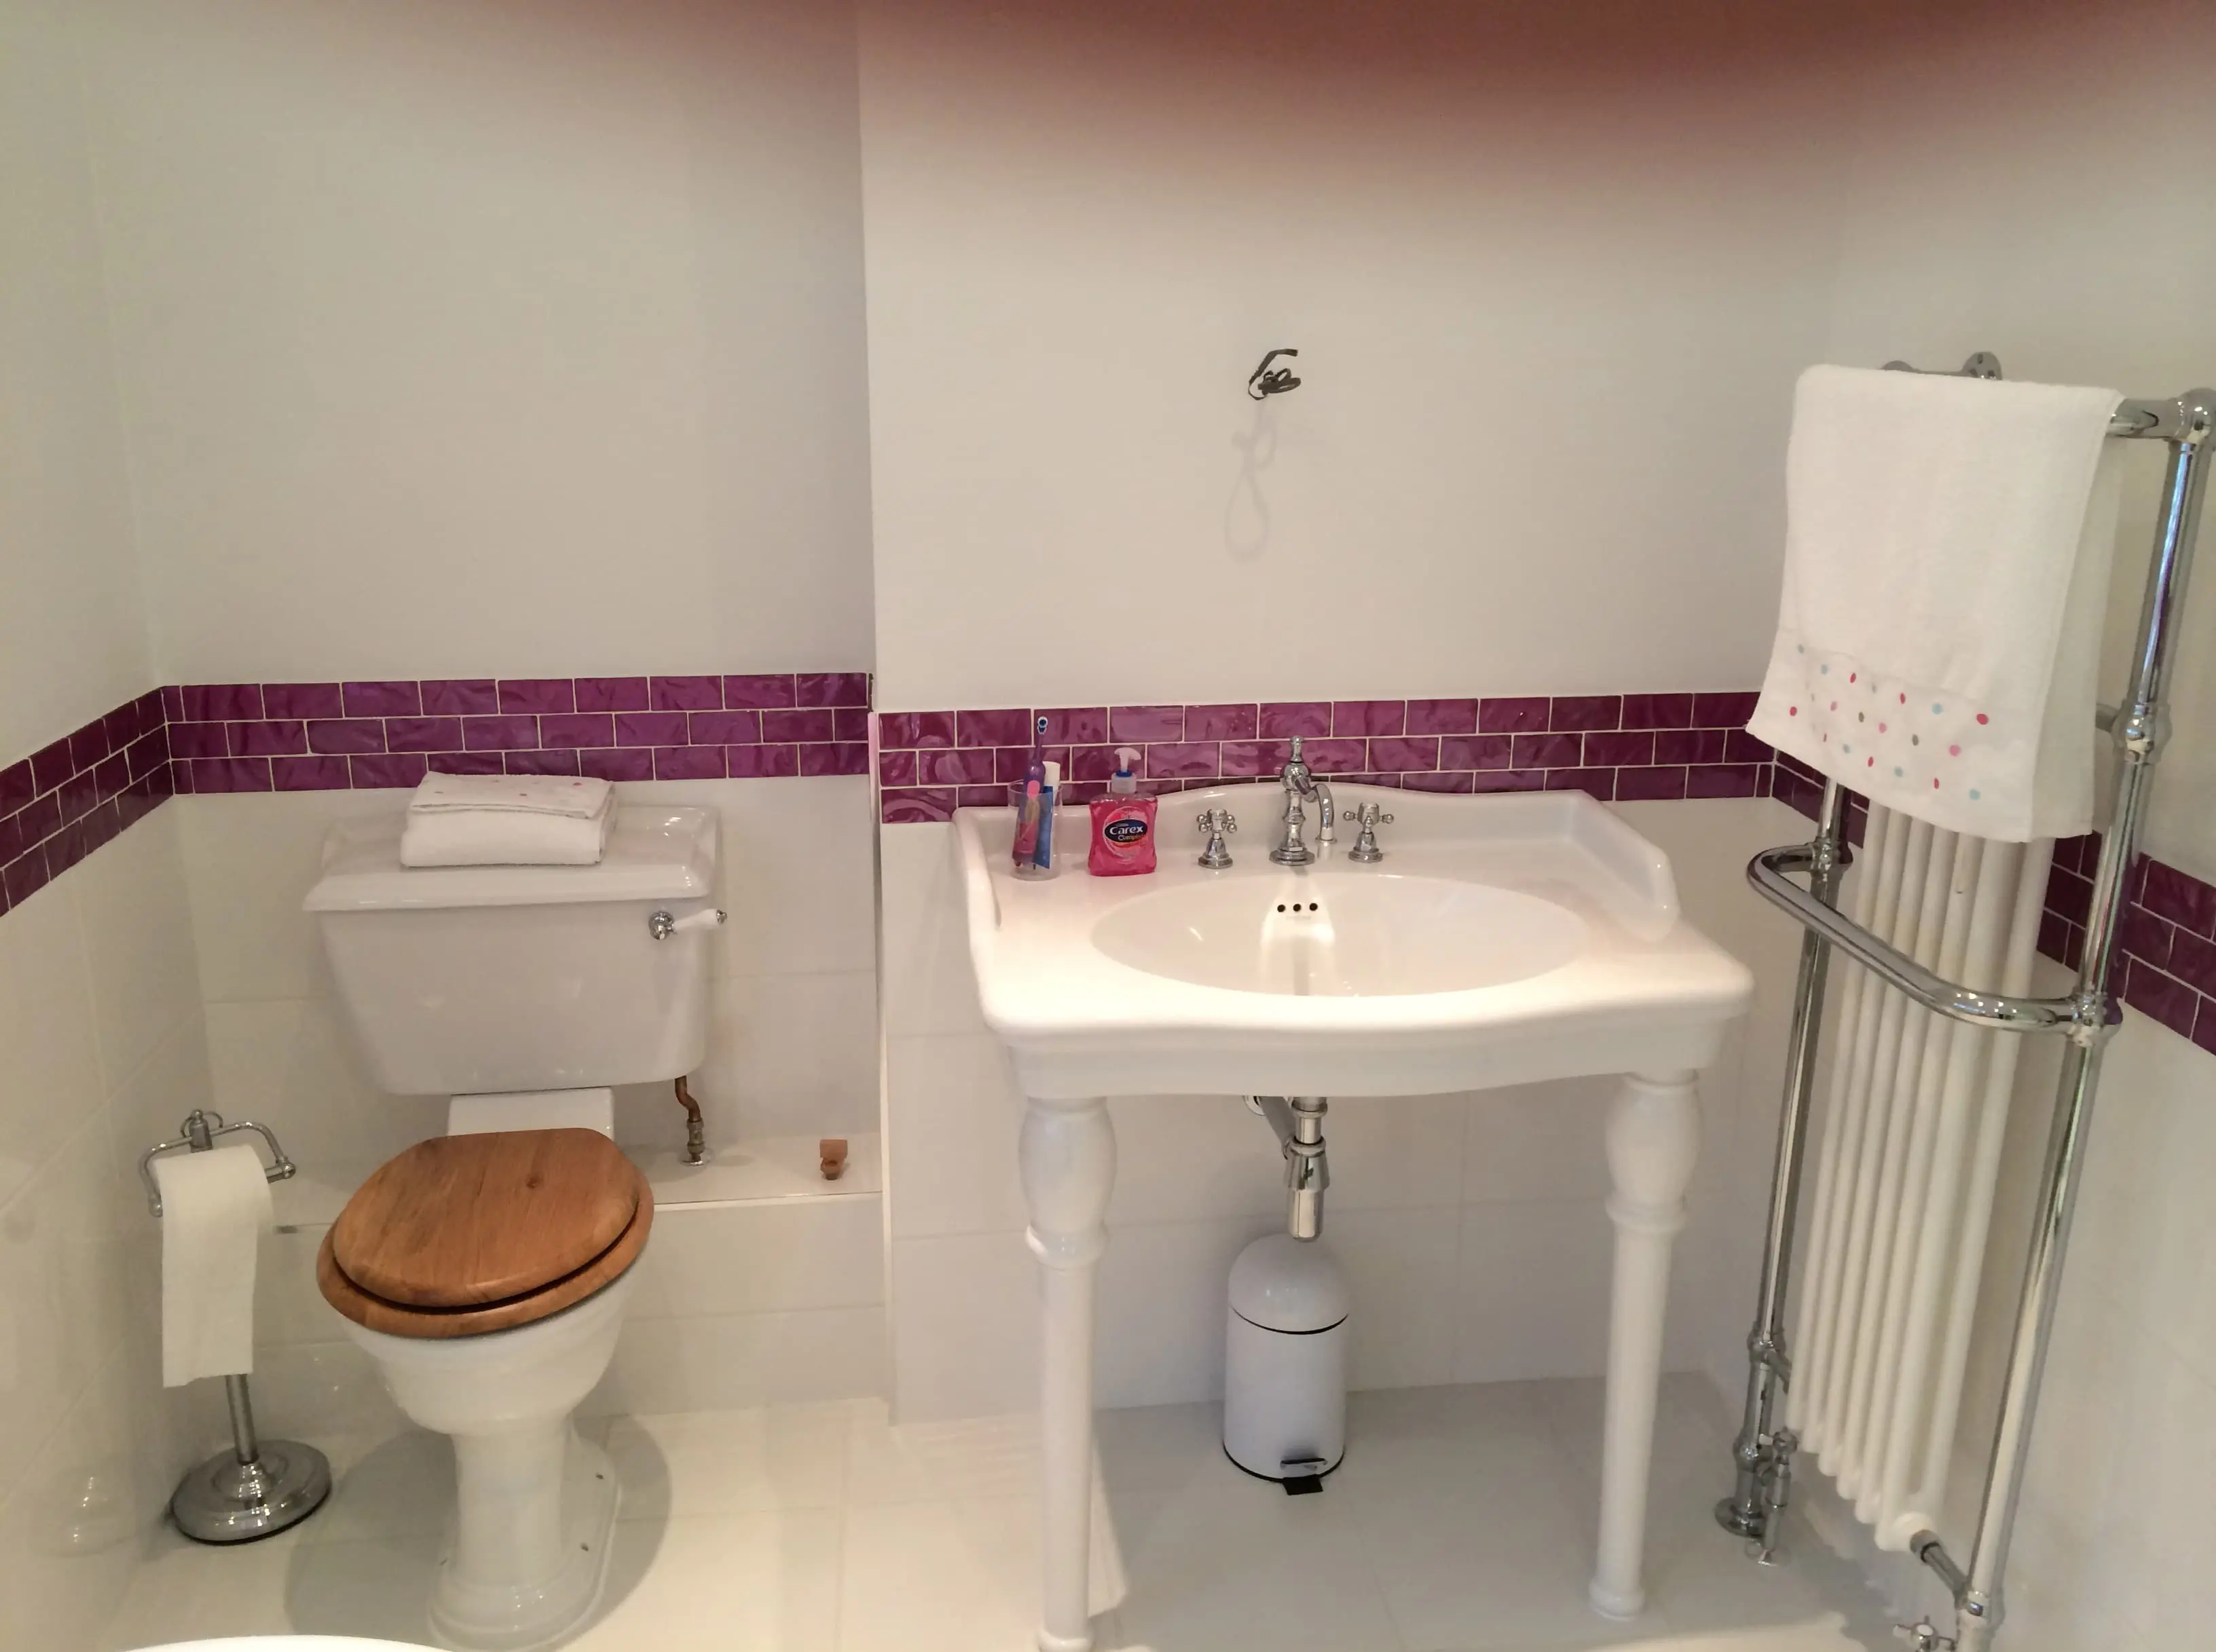 With&nbsp;over 42 years of experience, I can supply and fit bathroom fittings at competitive prices in the following areas:ReadingShinfieldCalcotWokinghamBracknellWoodleyAnd many areas more in and around&nbsp;Winnersh!Whether you want me to install a&nbsp;new wet room&nbsp;or just&nbsp;re-tile&nbsp;your existing bathroom, I can give your home a new look. I take great pride in providing a personalised service to&nbsp;suit your budget and taste.&nbsp;